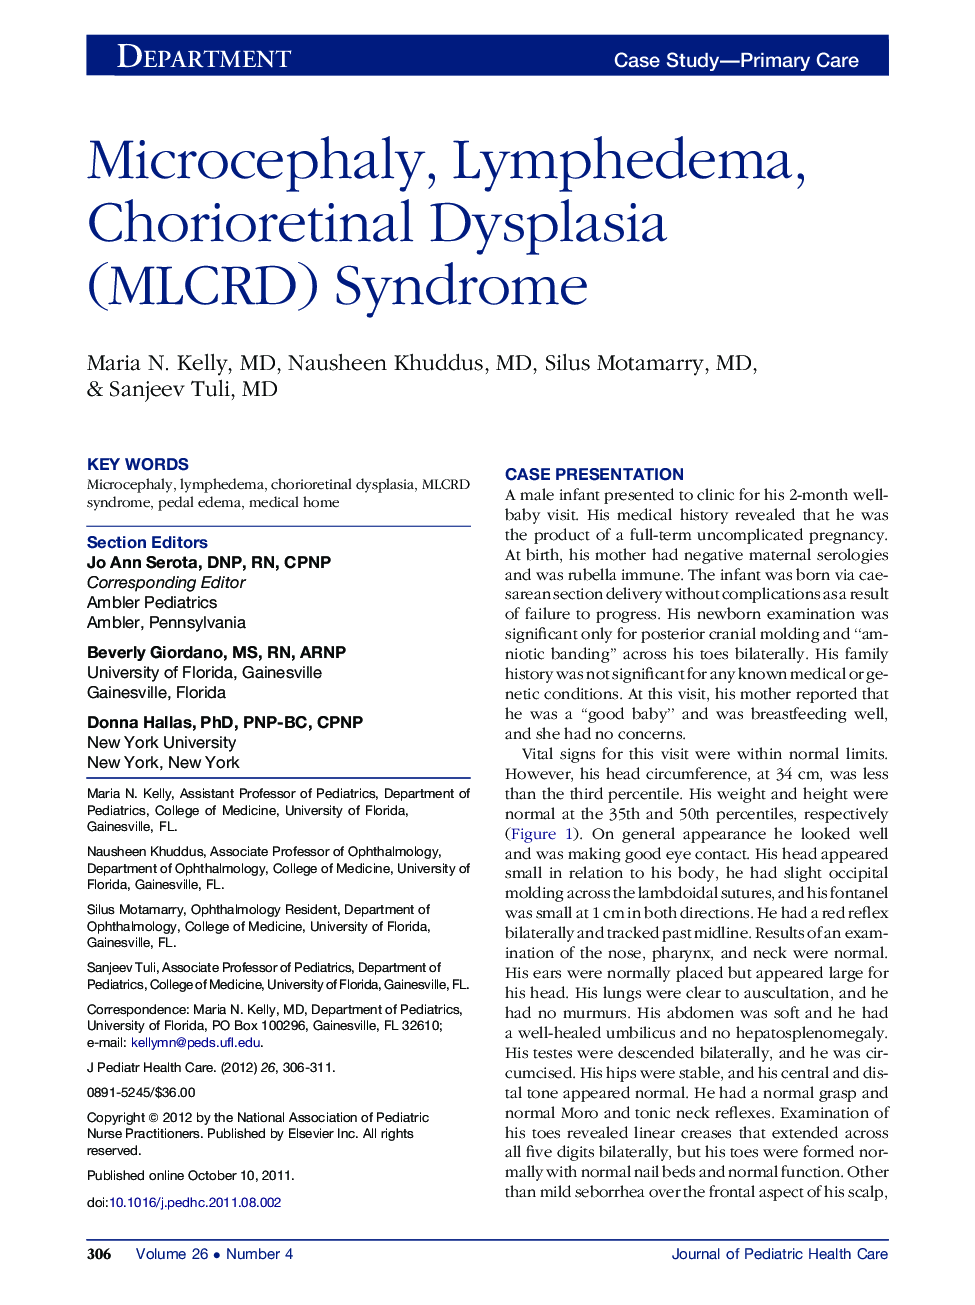 Microcephaly, Lymphedema, Chorioretinal Dysplasia (MLCRD) Syndrome